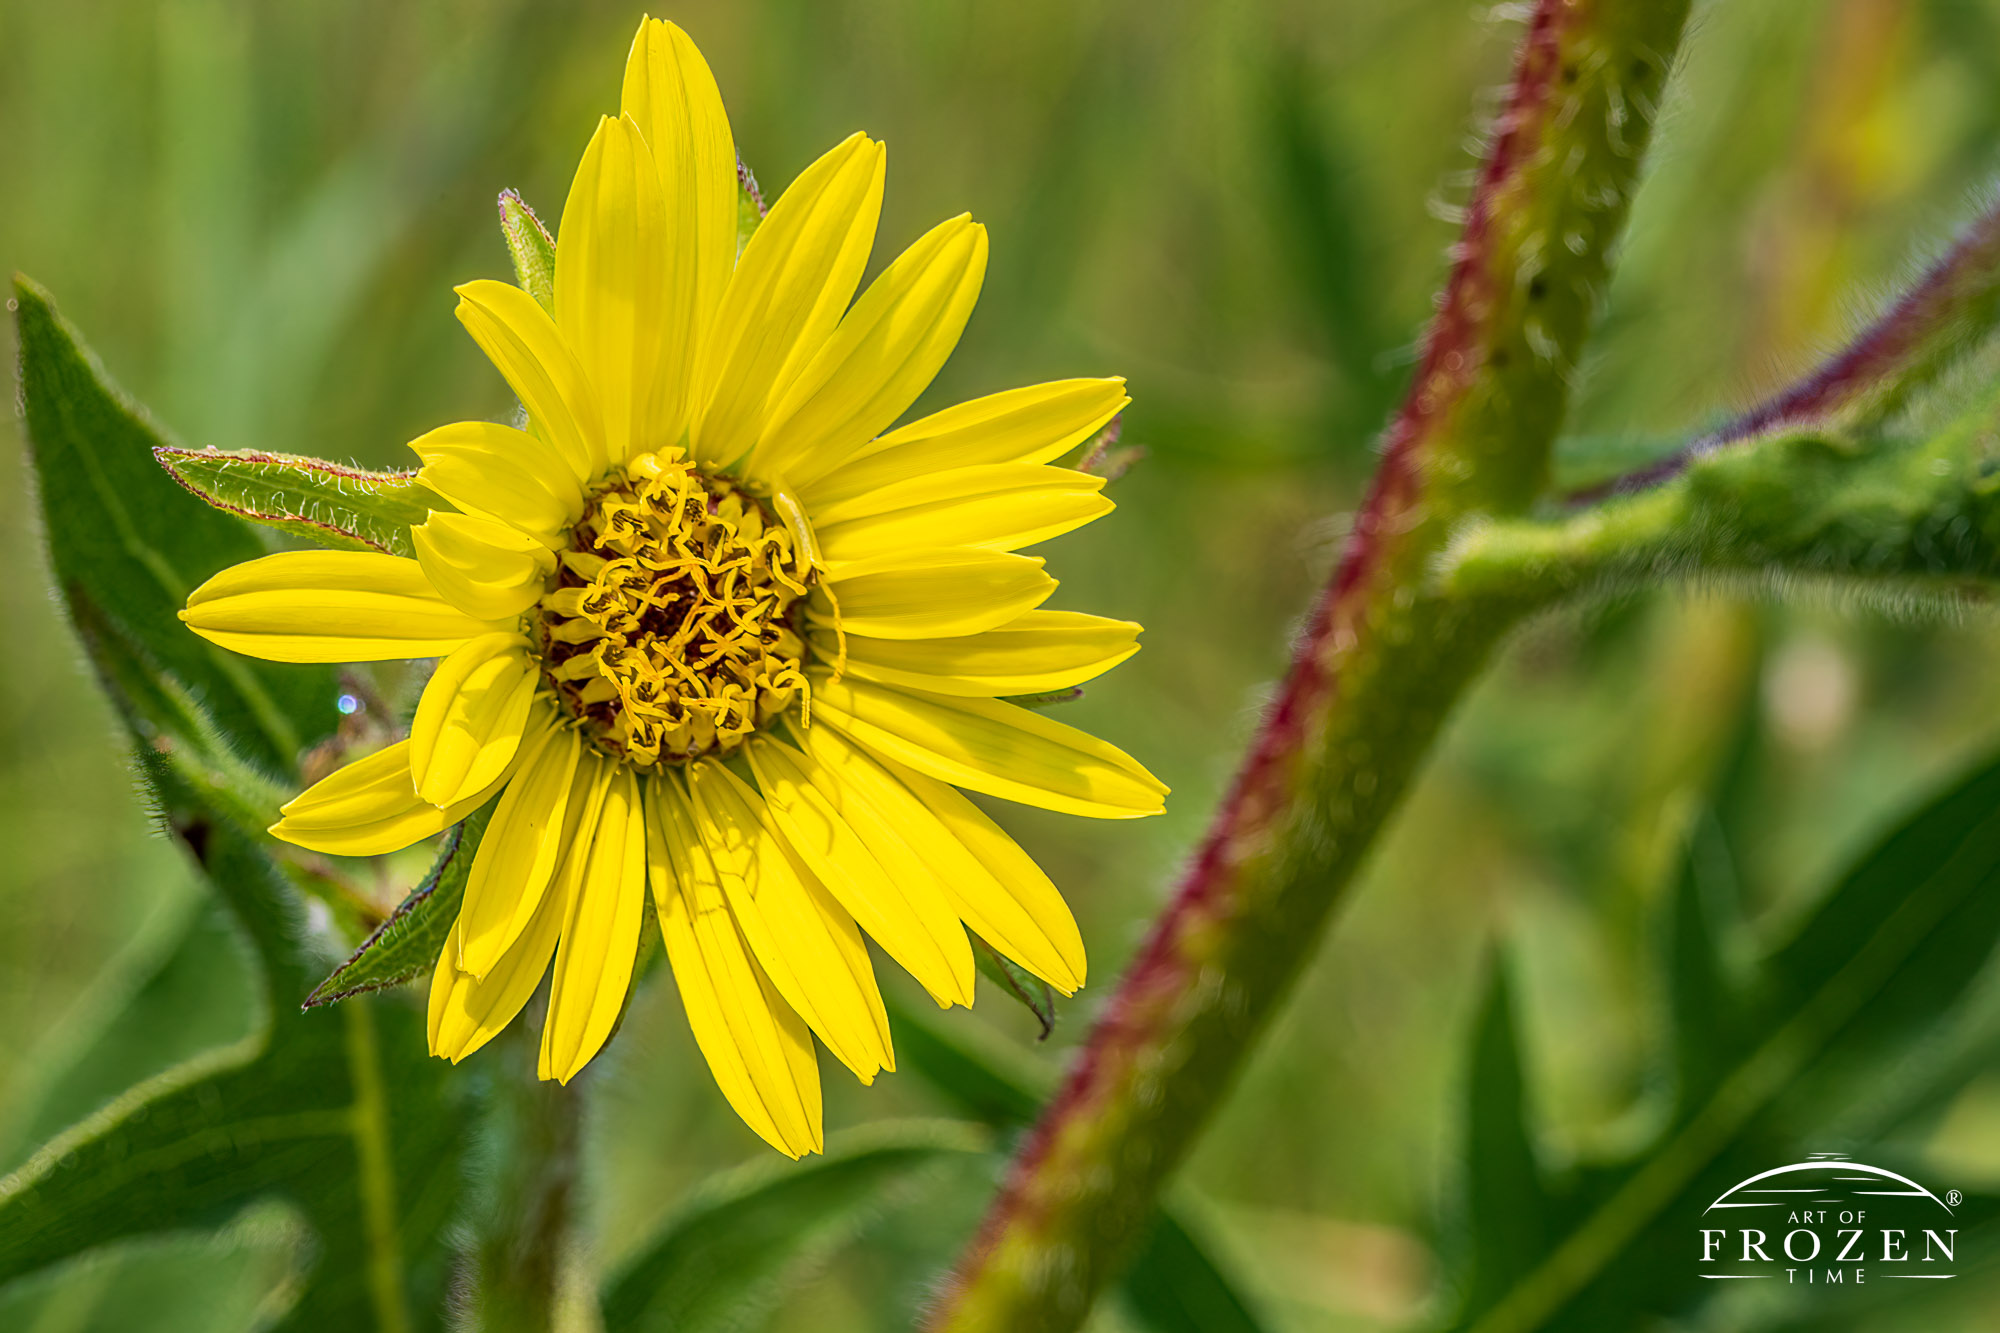 A macro view of the center of a Prairie Dock flower